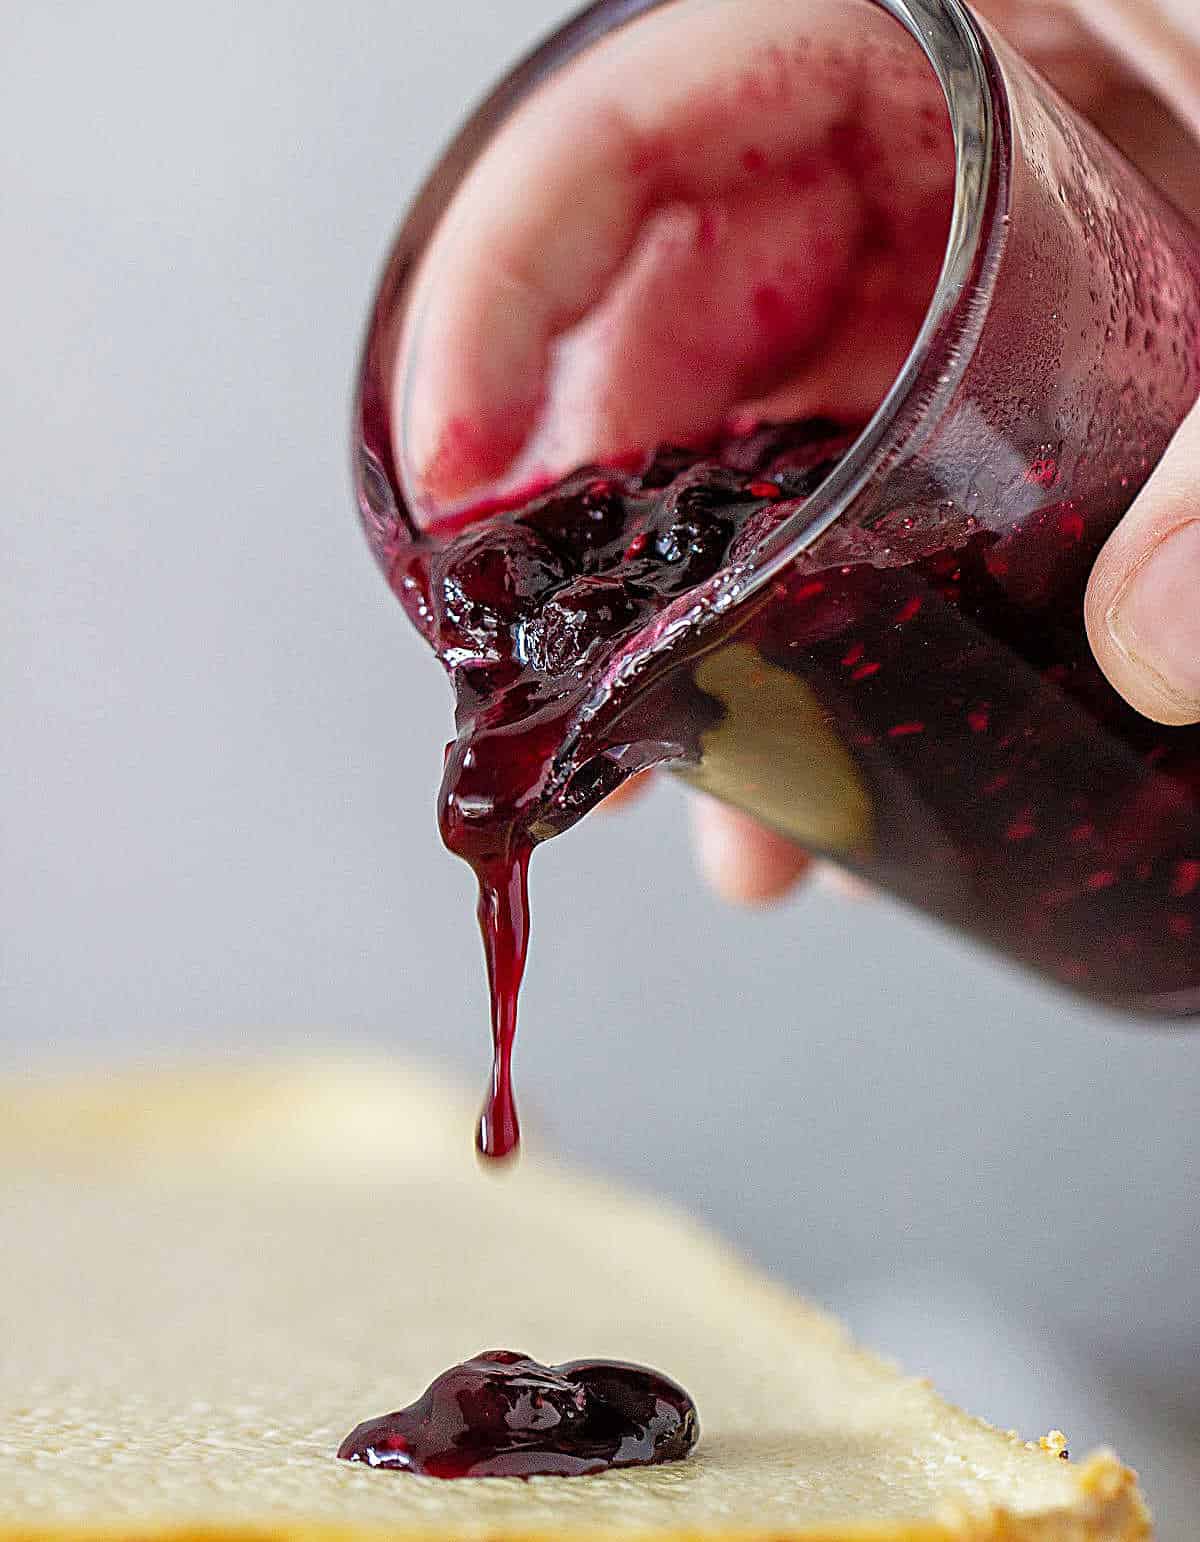 Jar pouring berry sauce on cheesecake